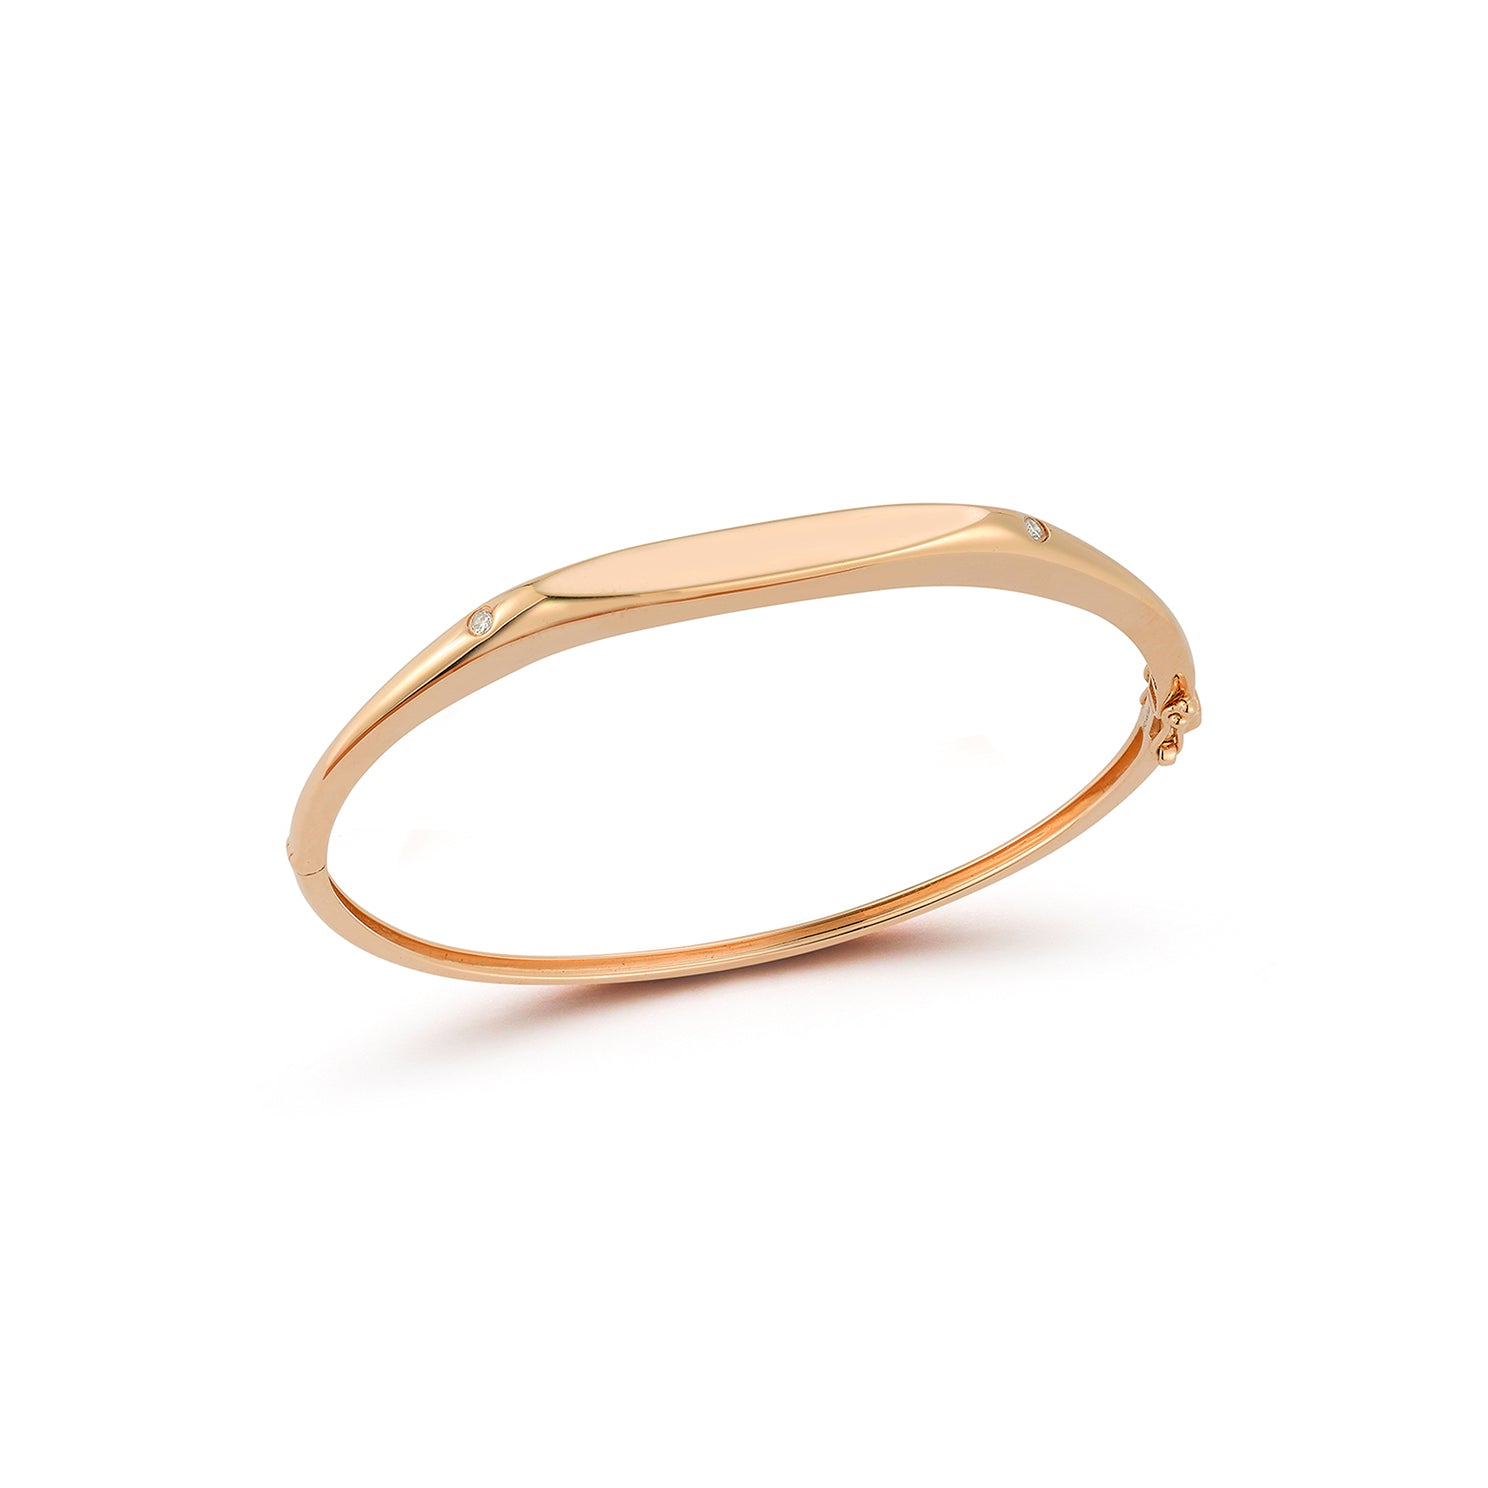 Gold Bangle with Diamond Detail in 14k rose gold